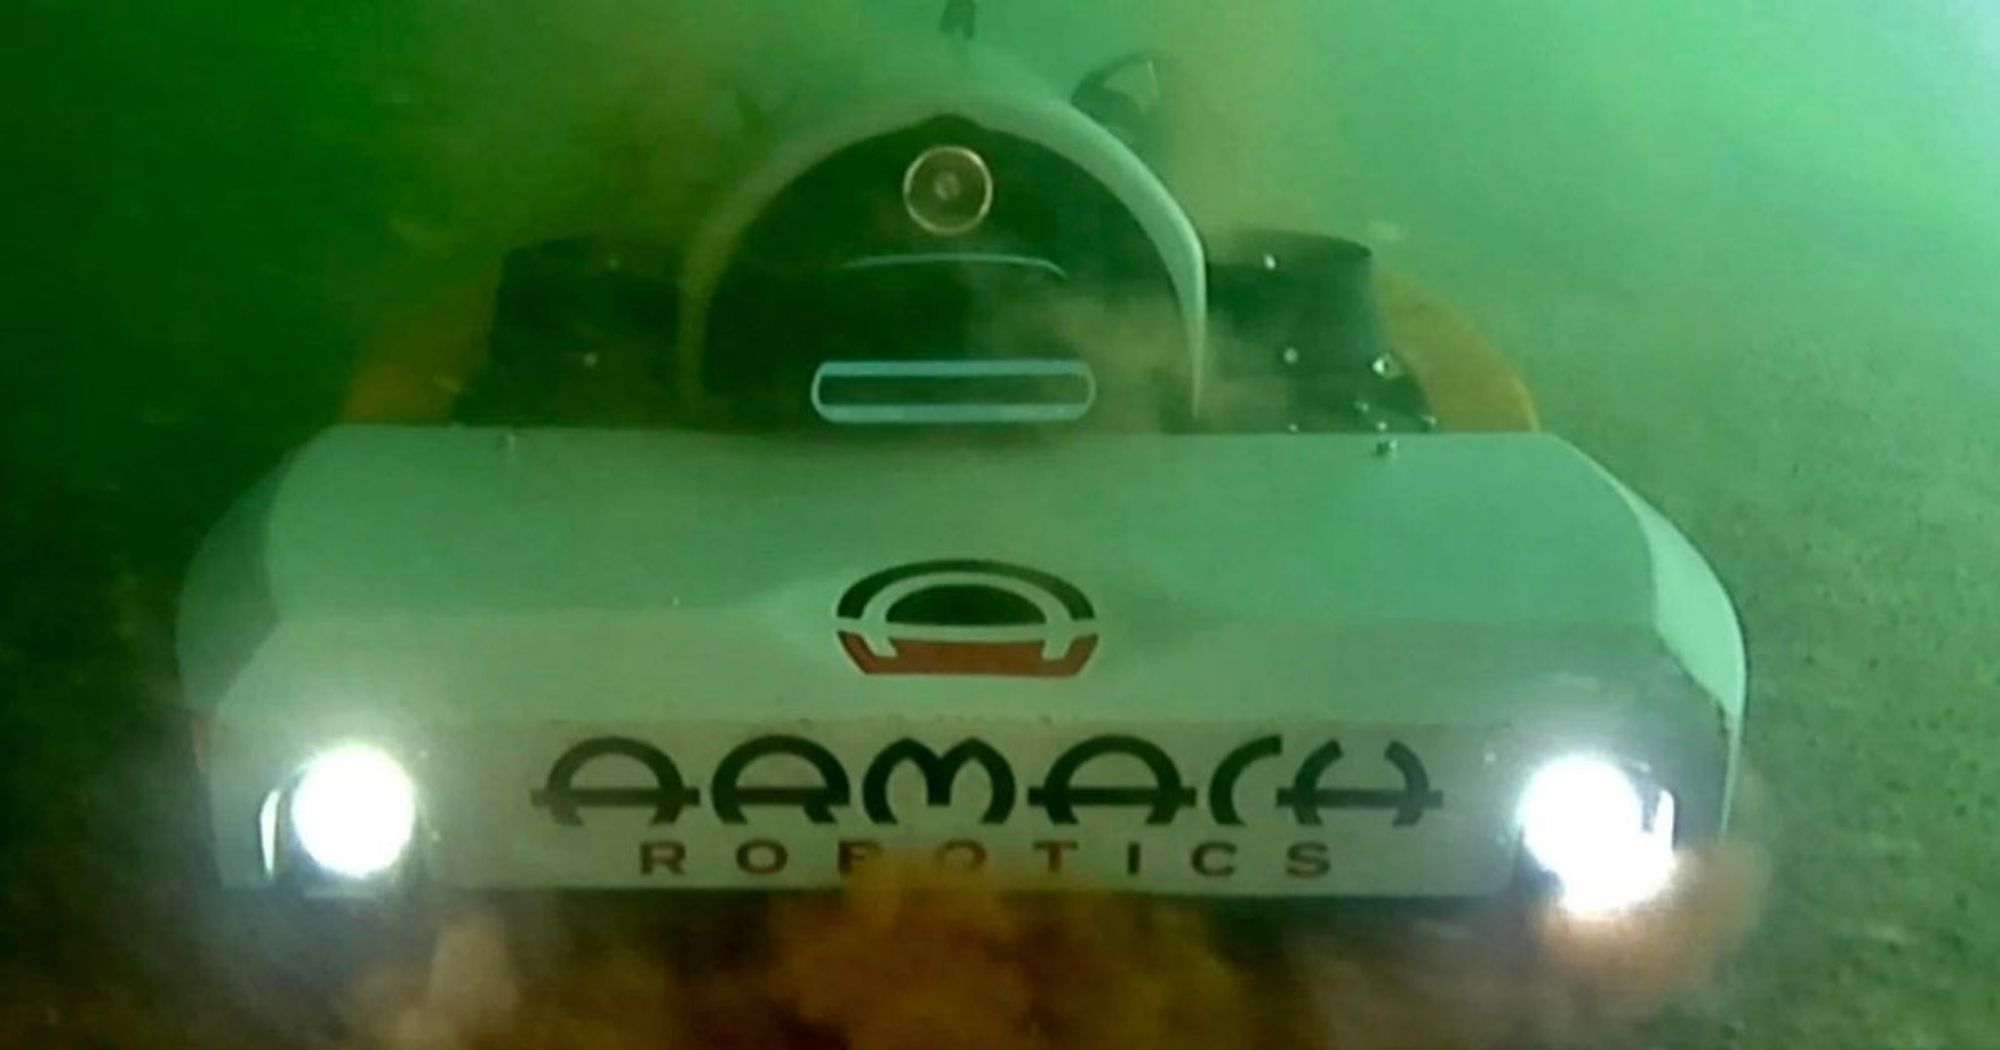 Armach Robotics Launches First Production Hull Service Robot | Subsea & Survey | News